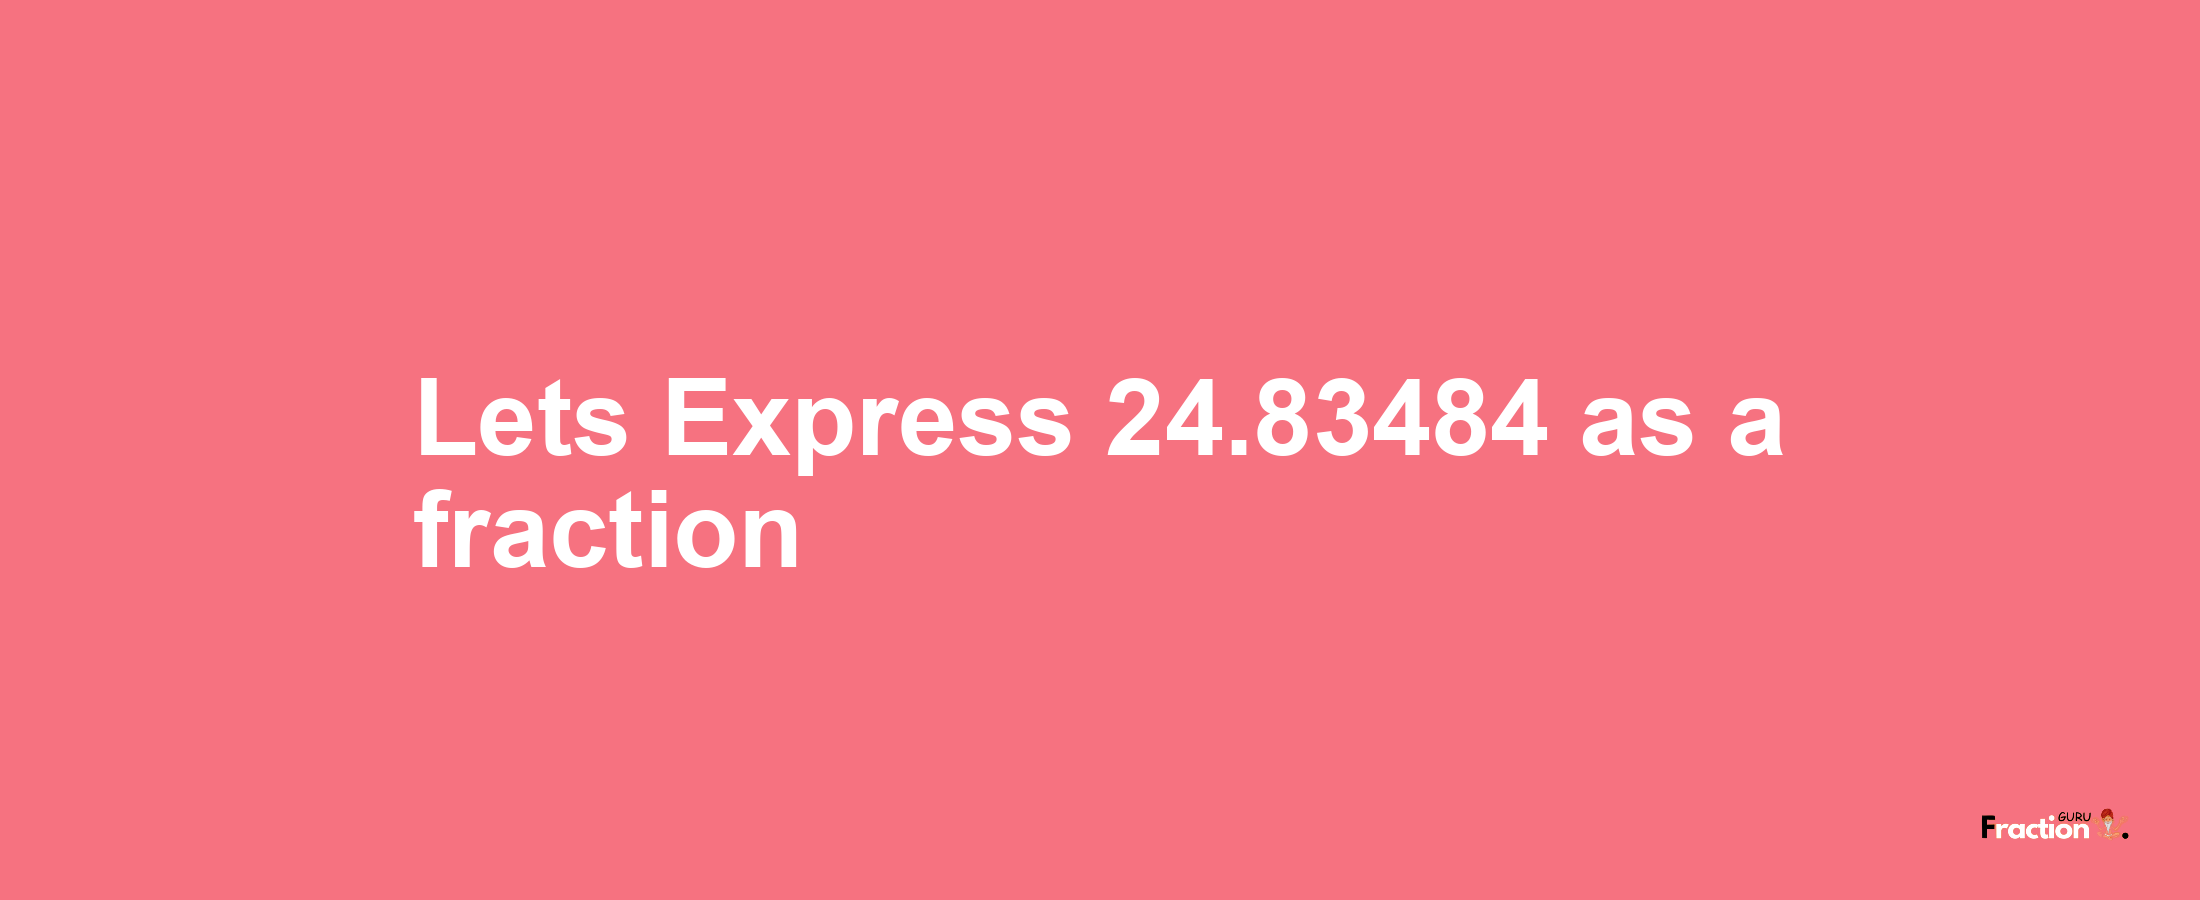 Lets Express 24.83484 as afraction